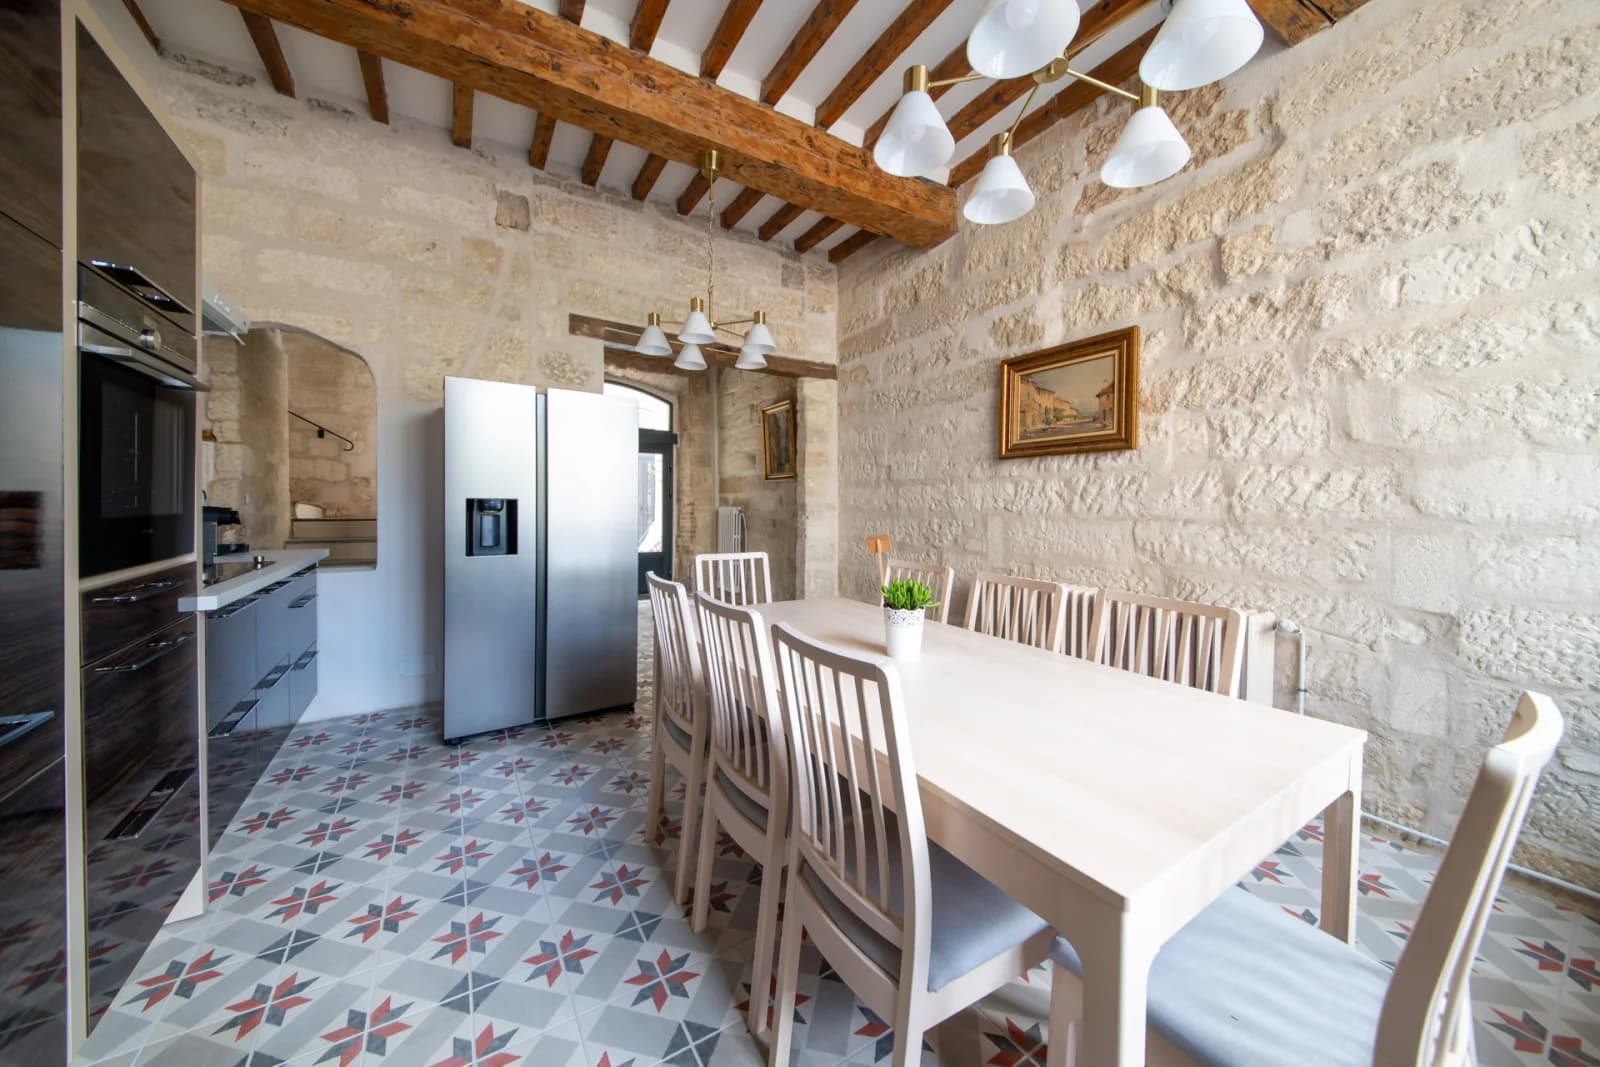 Meeting room in 16th-century town house 5 minutes from Avignon - 0